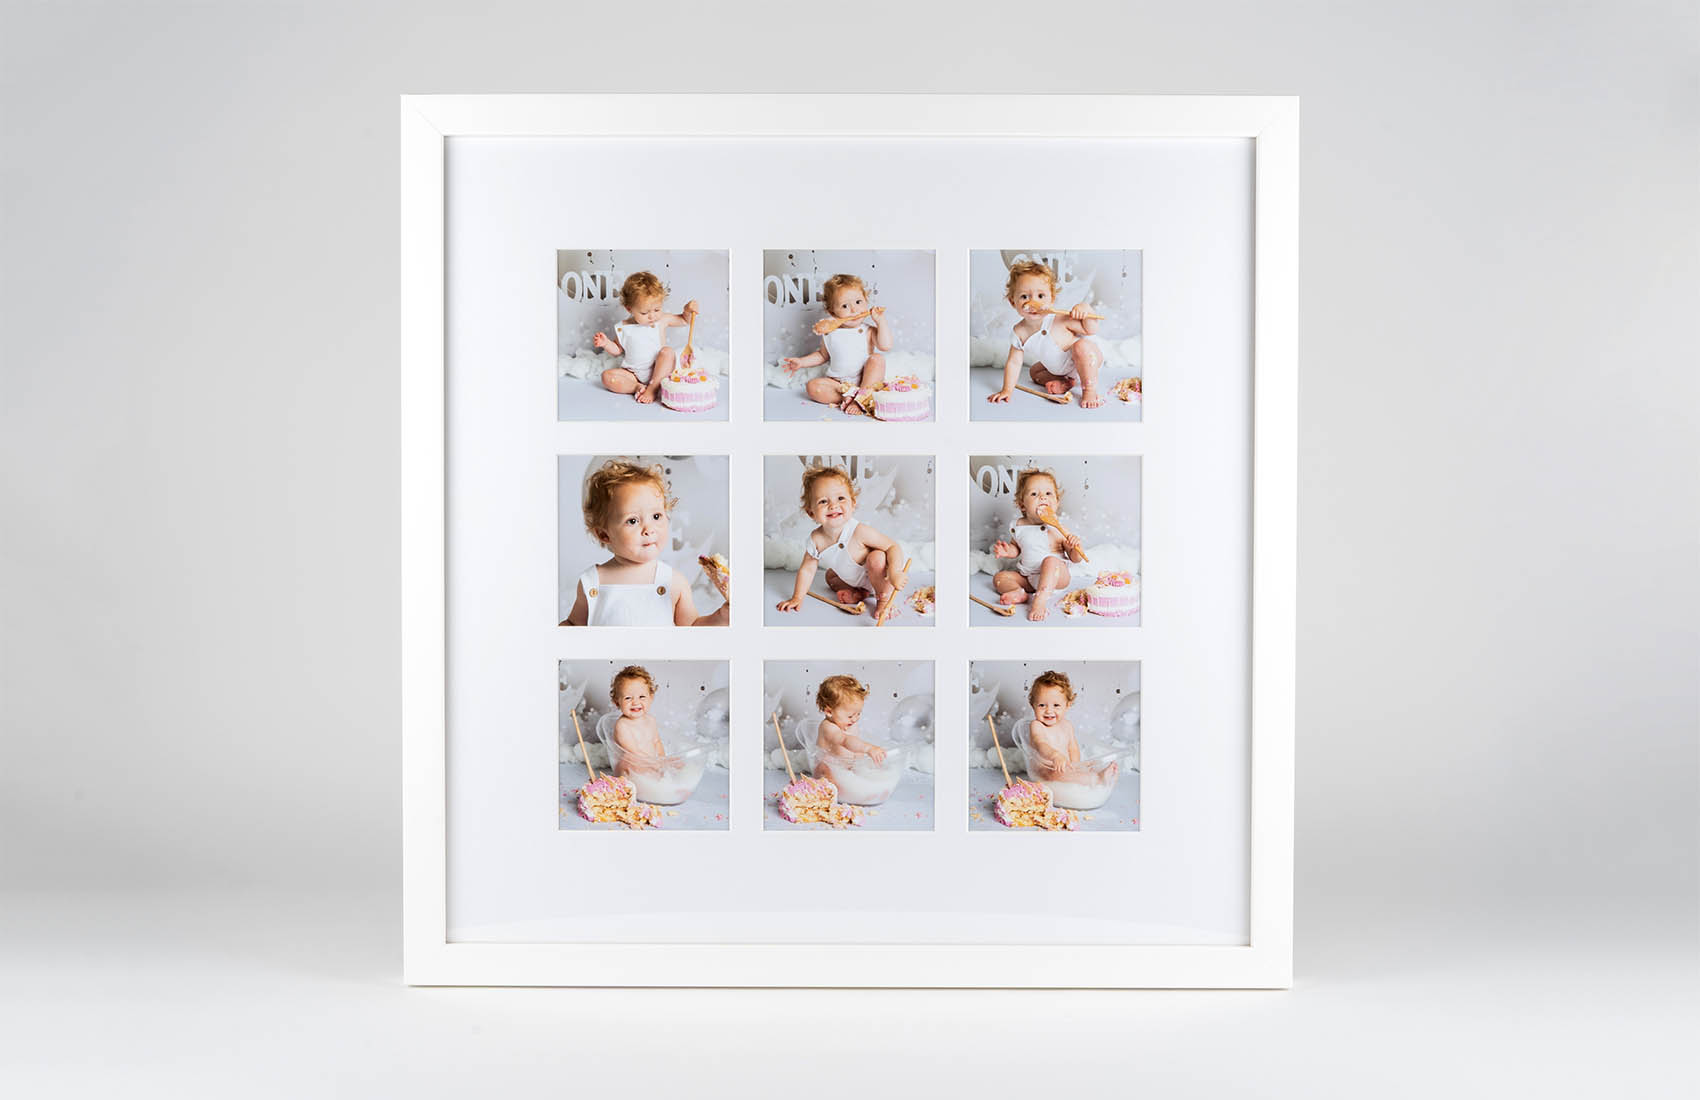 Classic Large – Contemporary Wooden Photo Frame